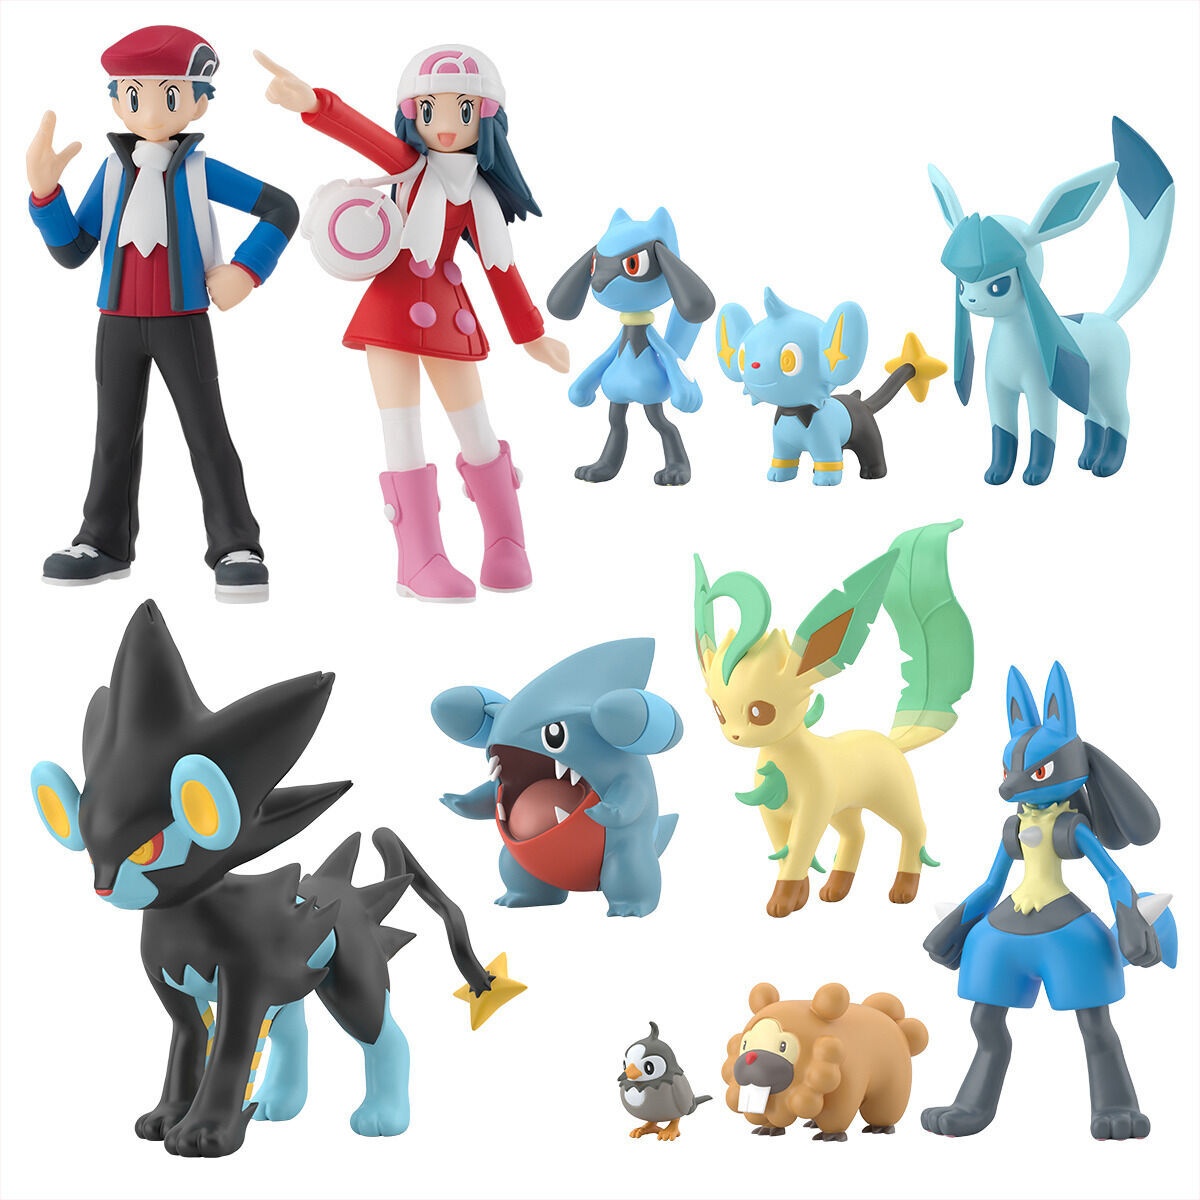 Search results for: 'Pokemon'